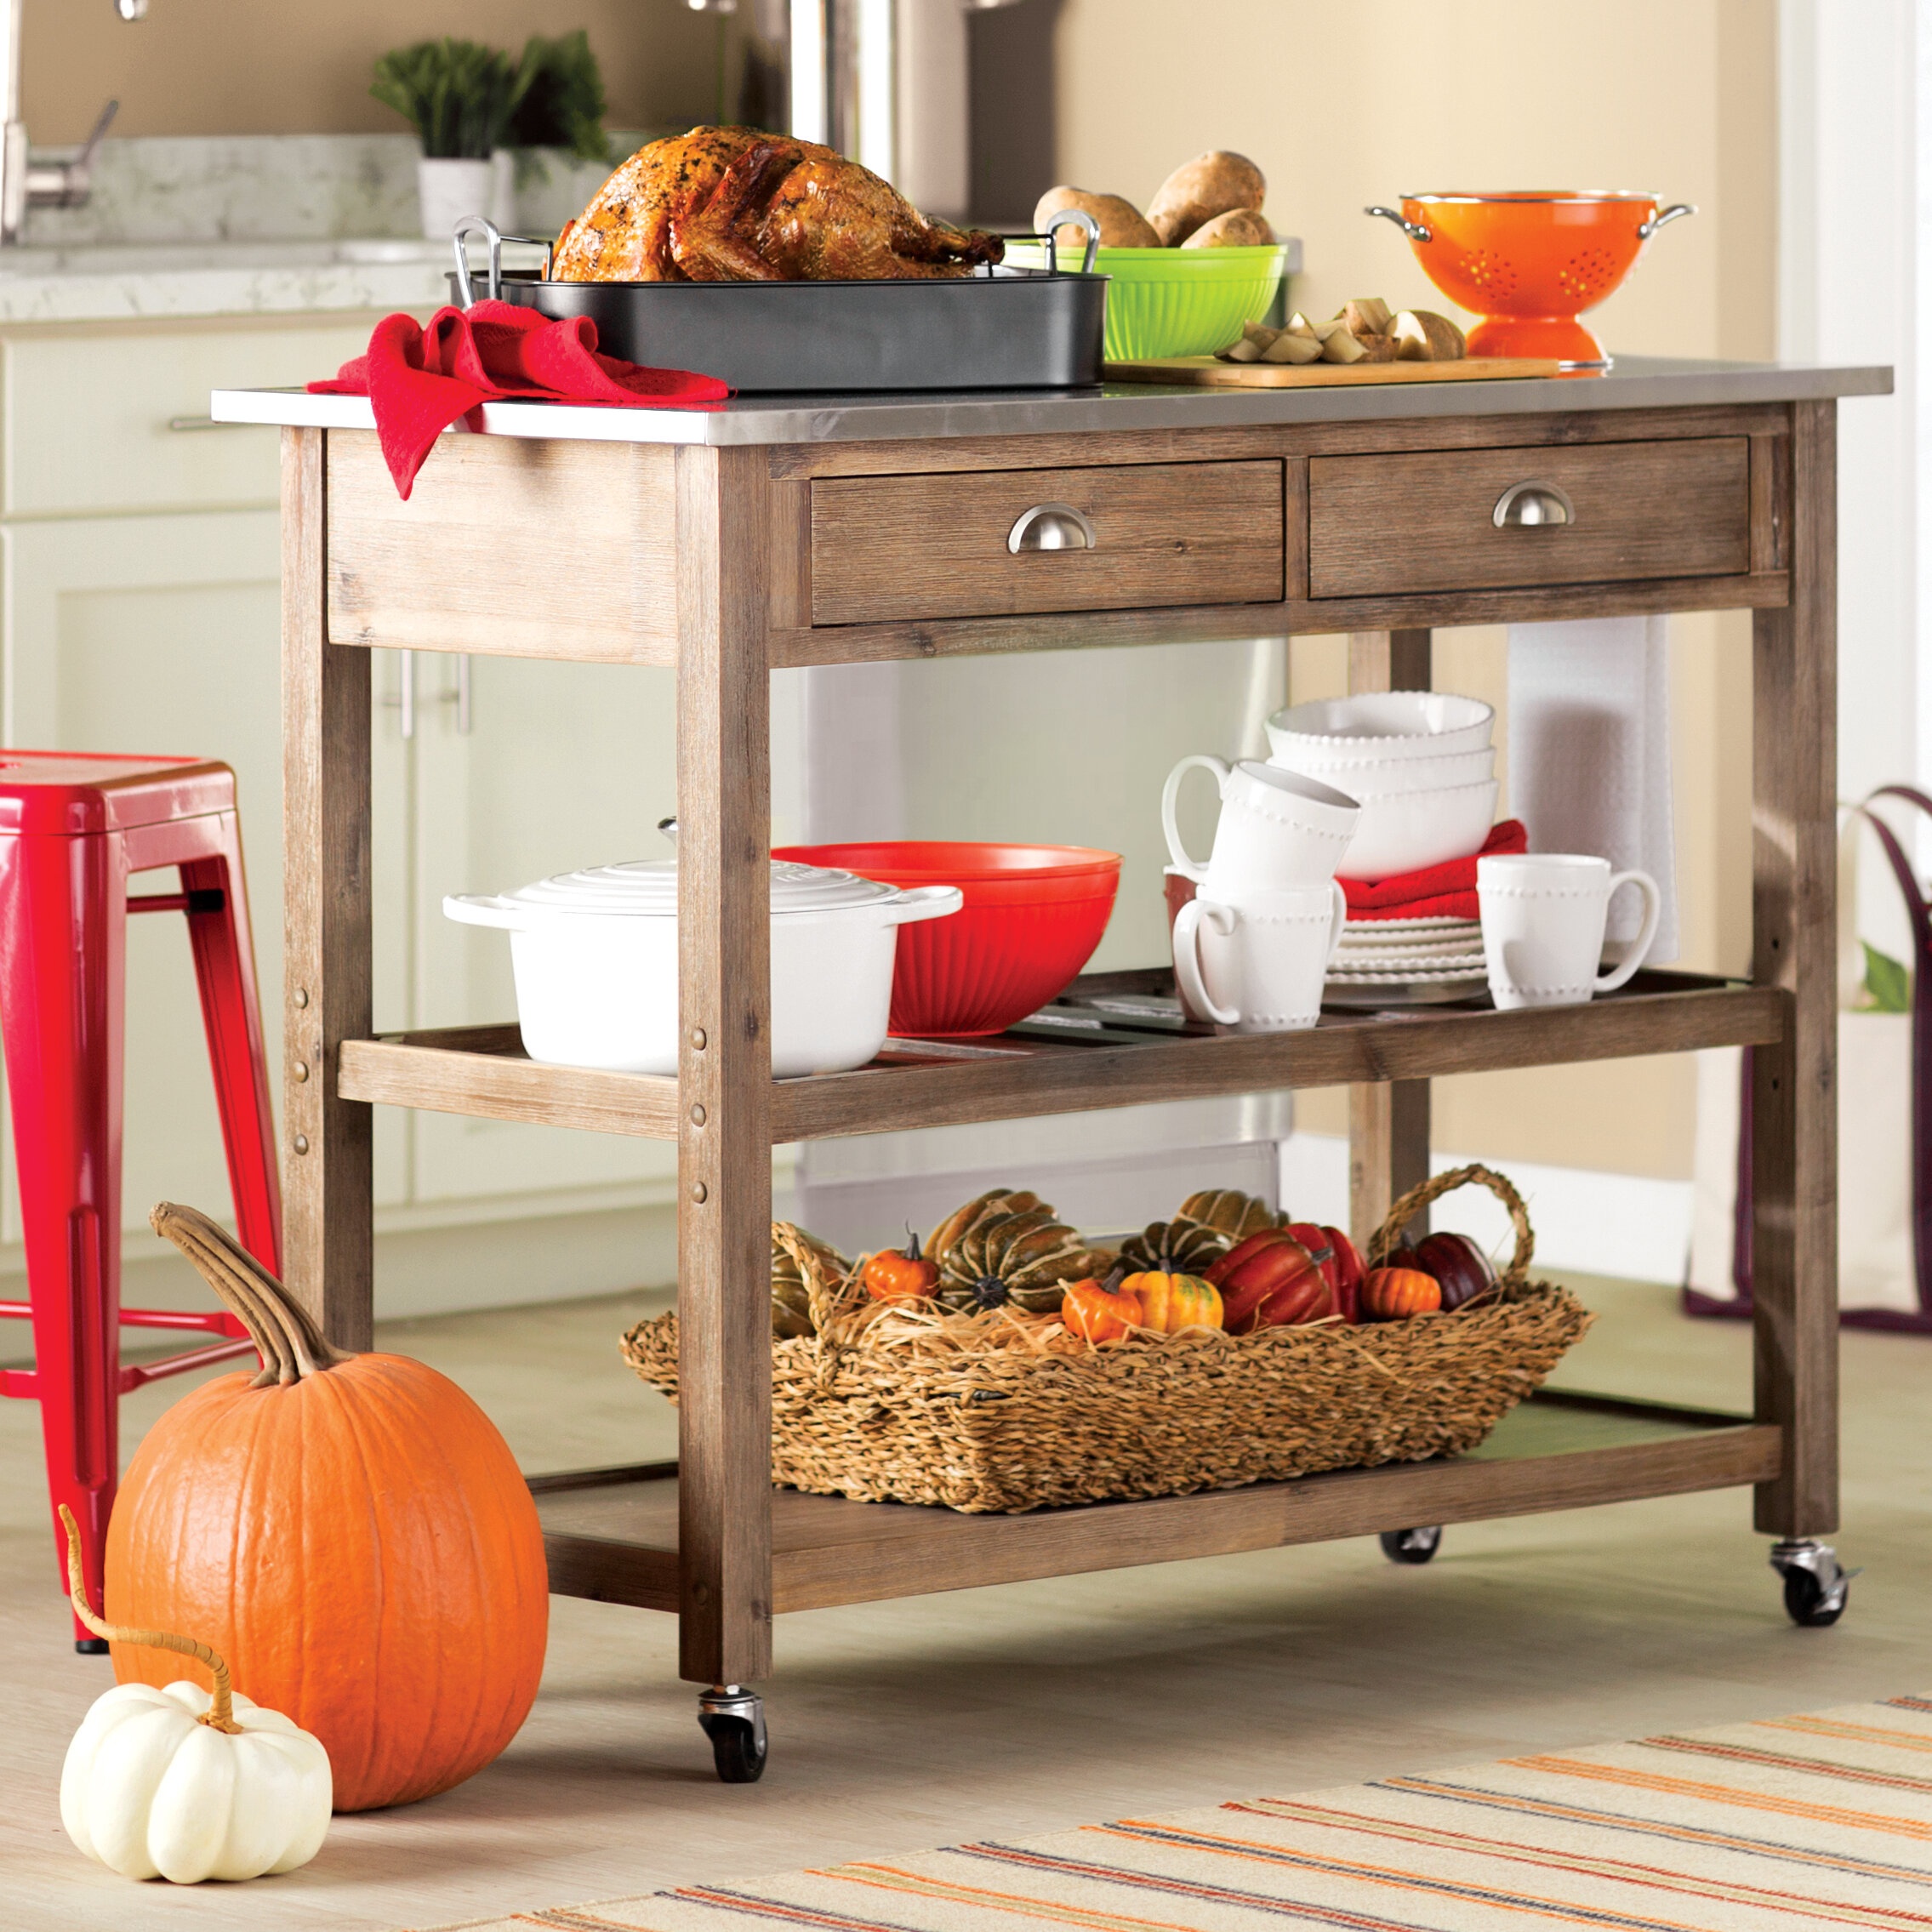 https://visualhunt.com/photos/23/courtright-rolling-kitchen-cart-with-stainless-steel-top-2.jpg